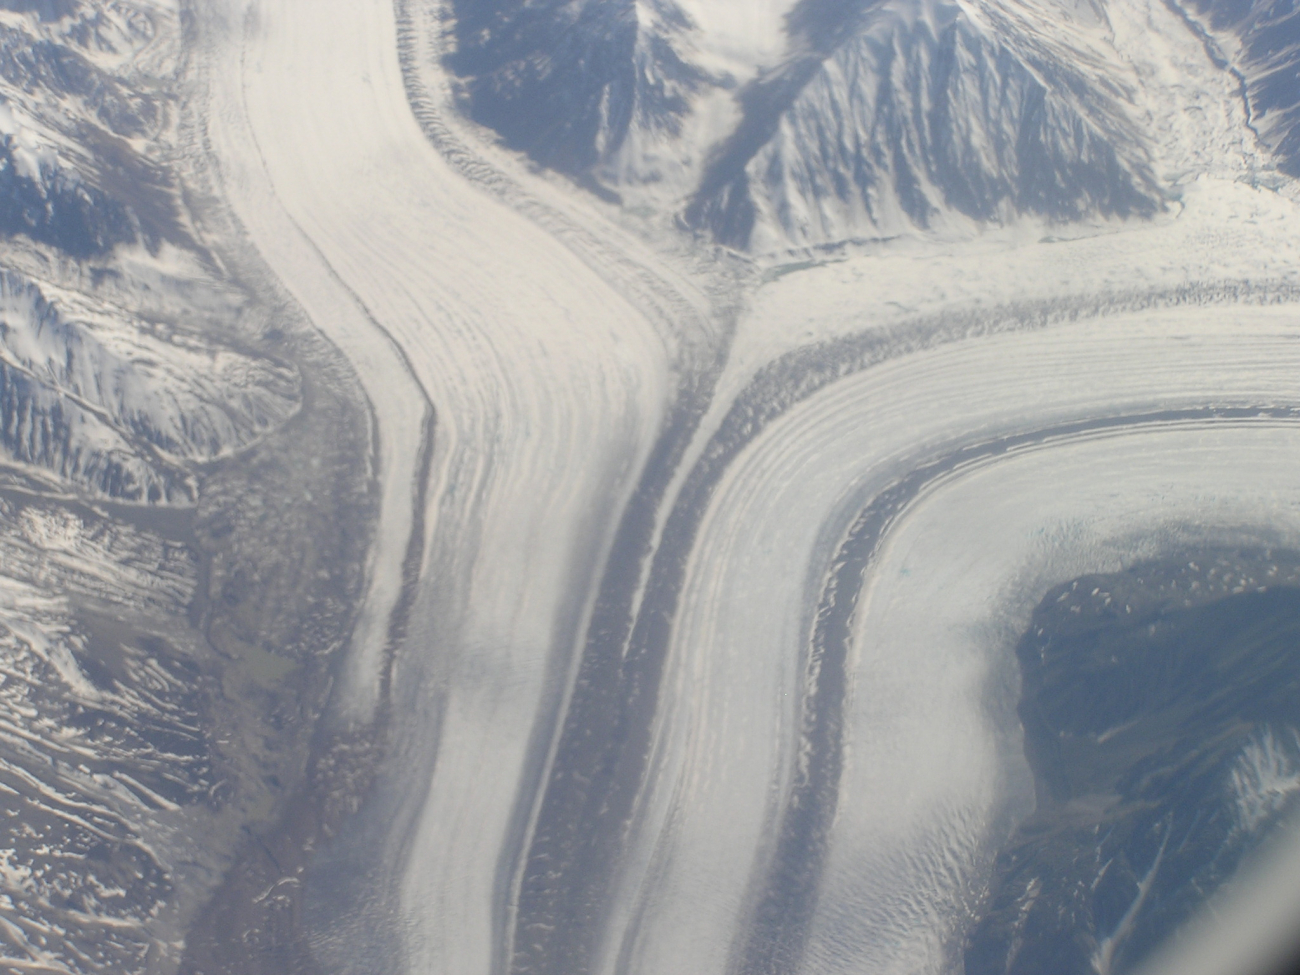 Flying over the juncture of two glaciers